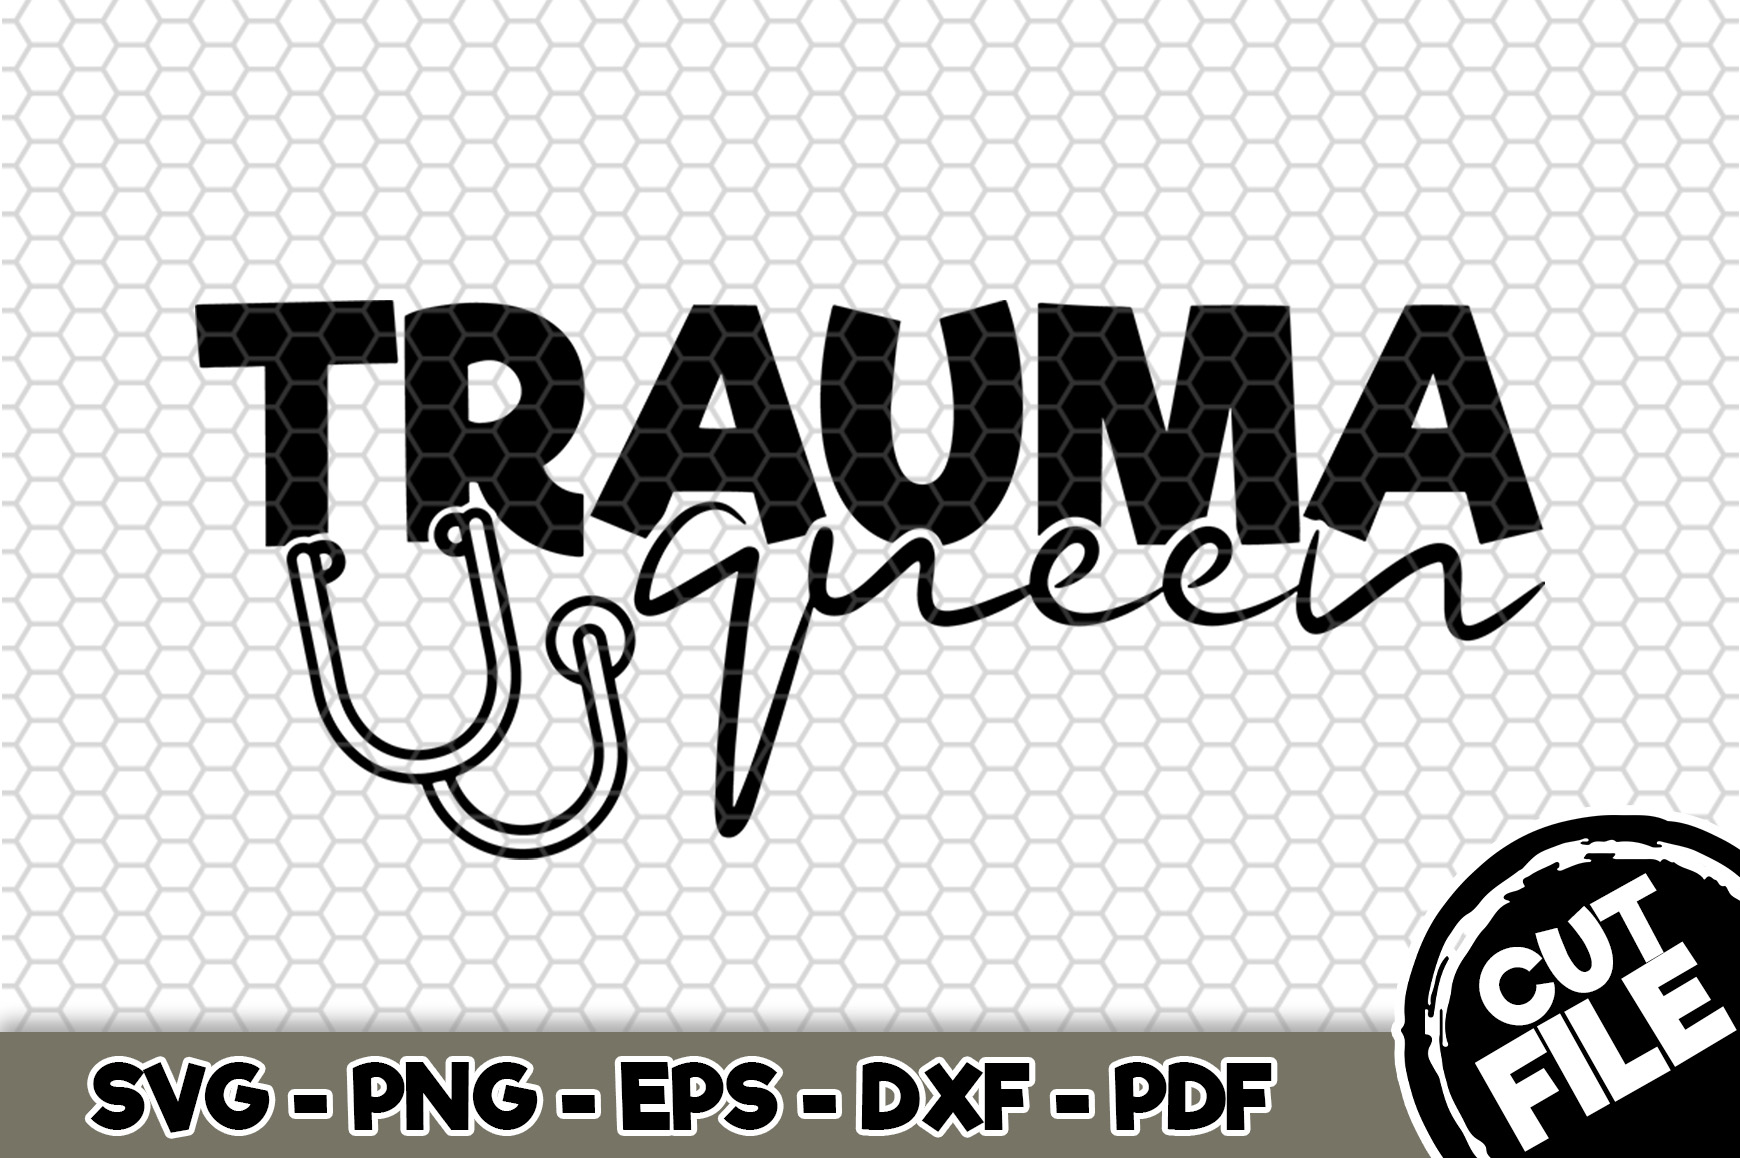 Free Free Trauma Queen Svg 136 SVG PNG EPS DXF File